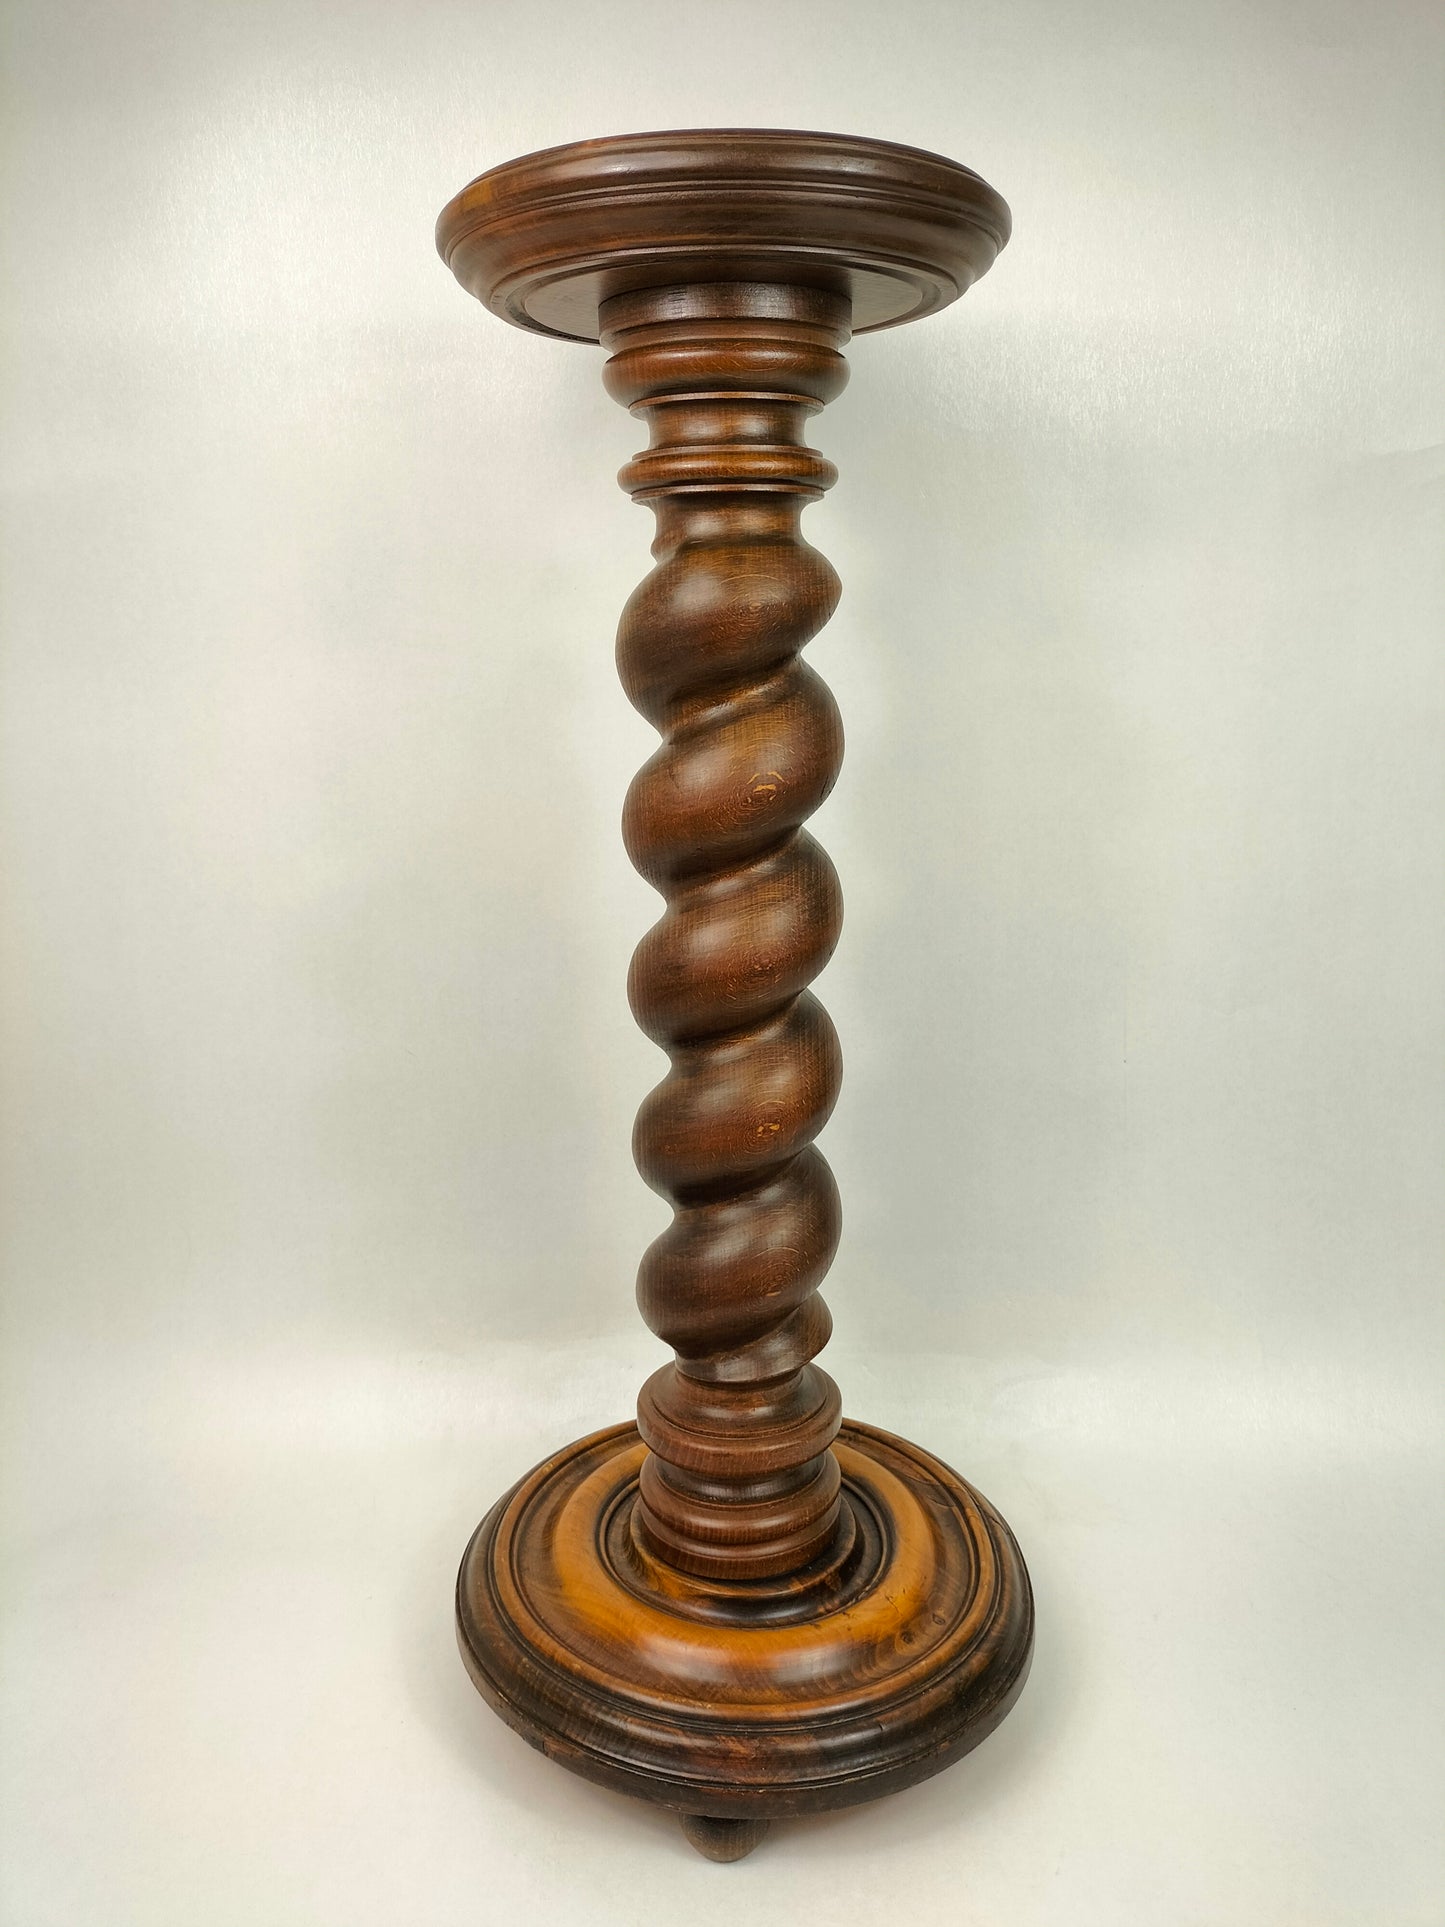 Vintage wooden barley twist plant stand // Oak - Early 20th century